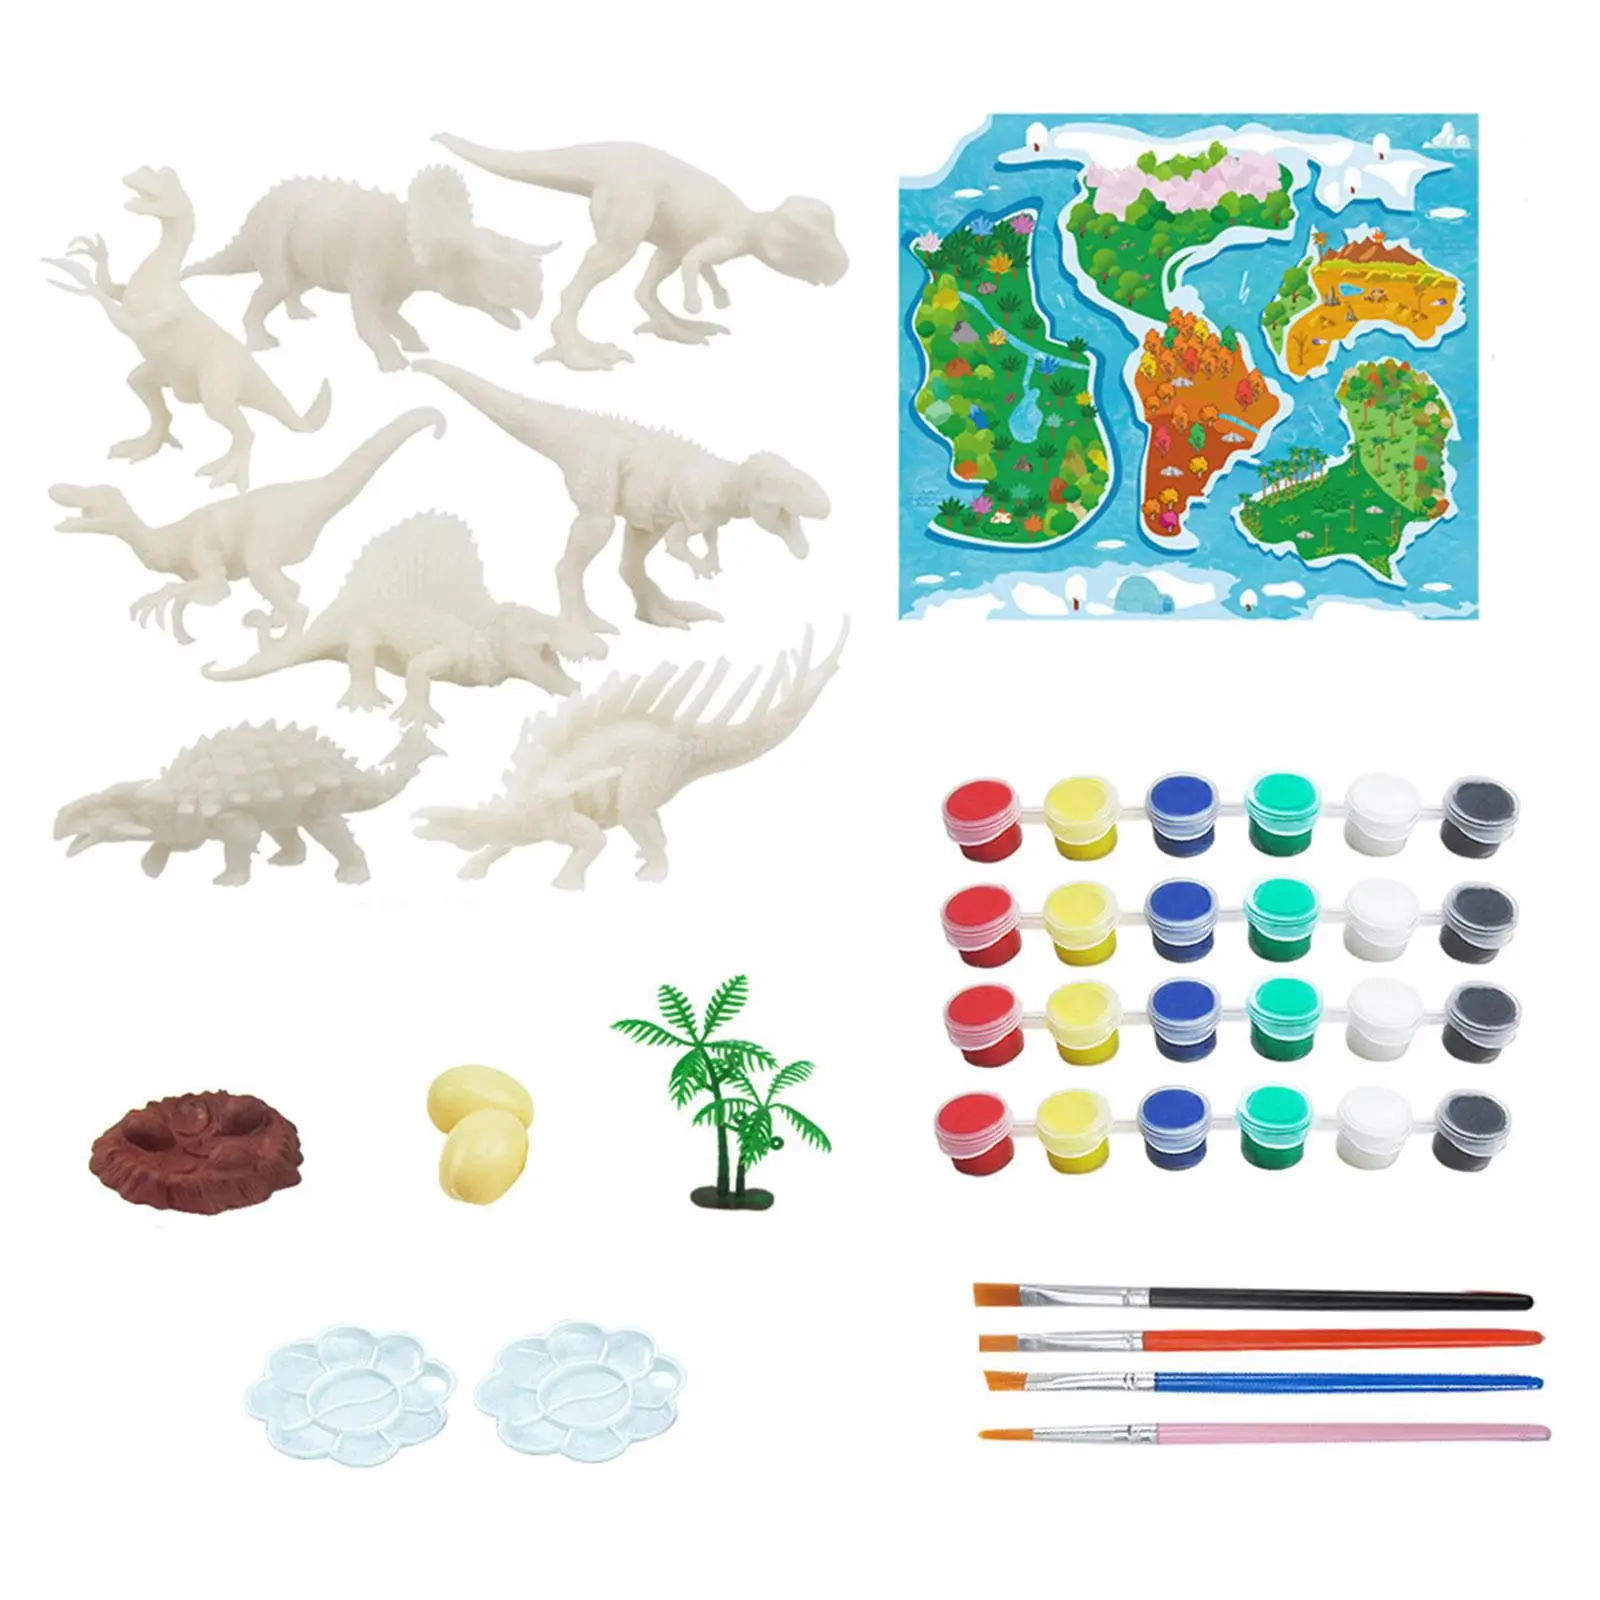 DIY Coloring Dinosaur Model Dinosaur Coloring Supplies Toy Crafts Hand Painted Dinosaur Painting Kit for Party Activity